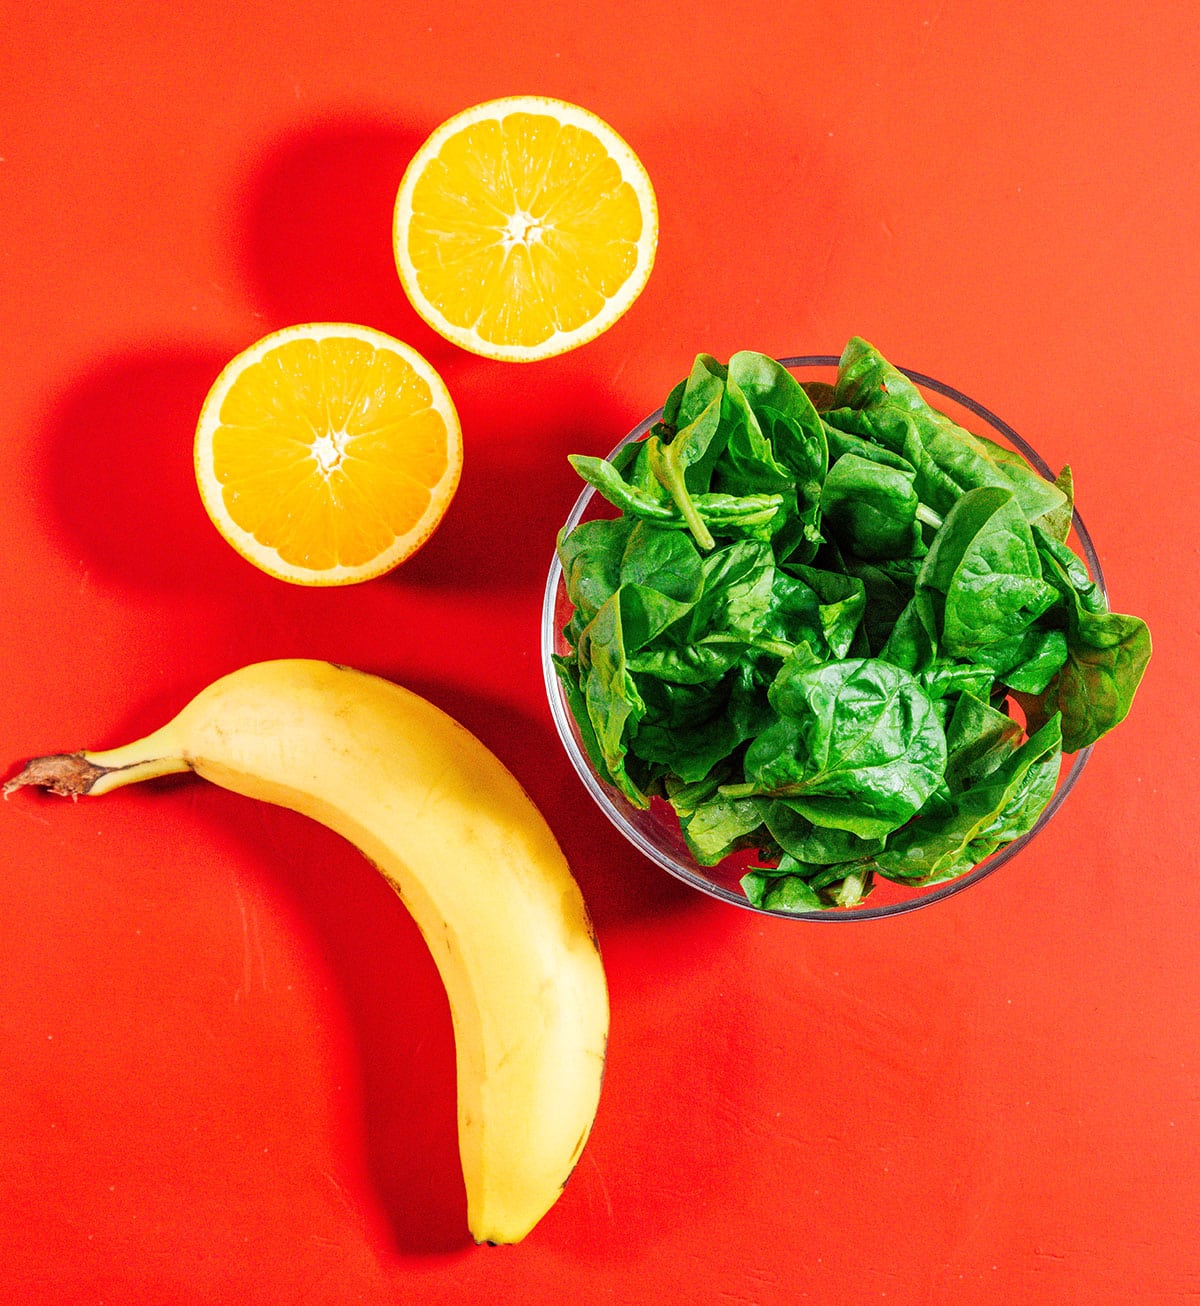 Ingredients to make a spinach smoothie.